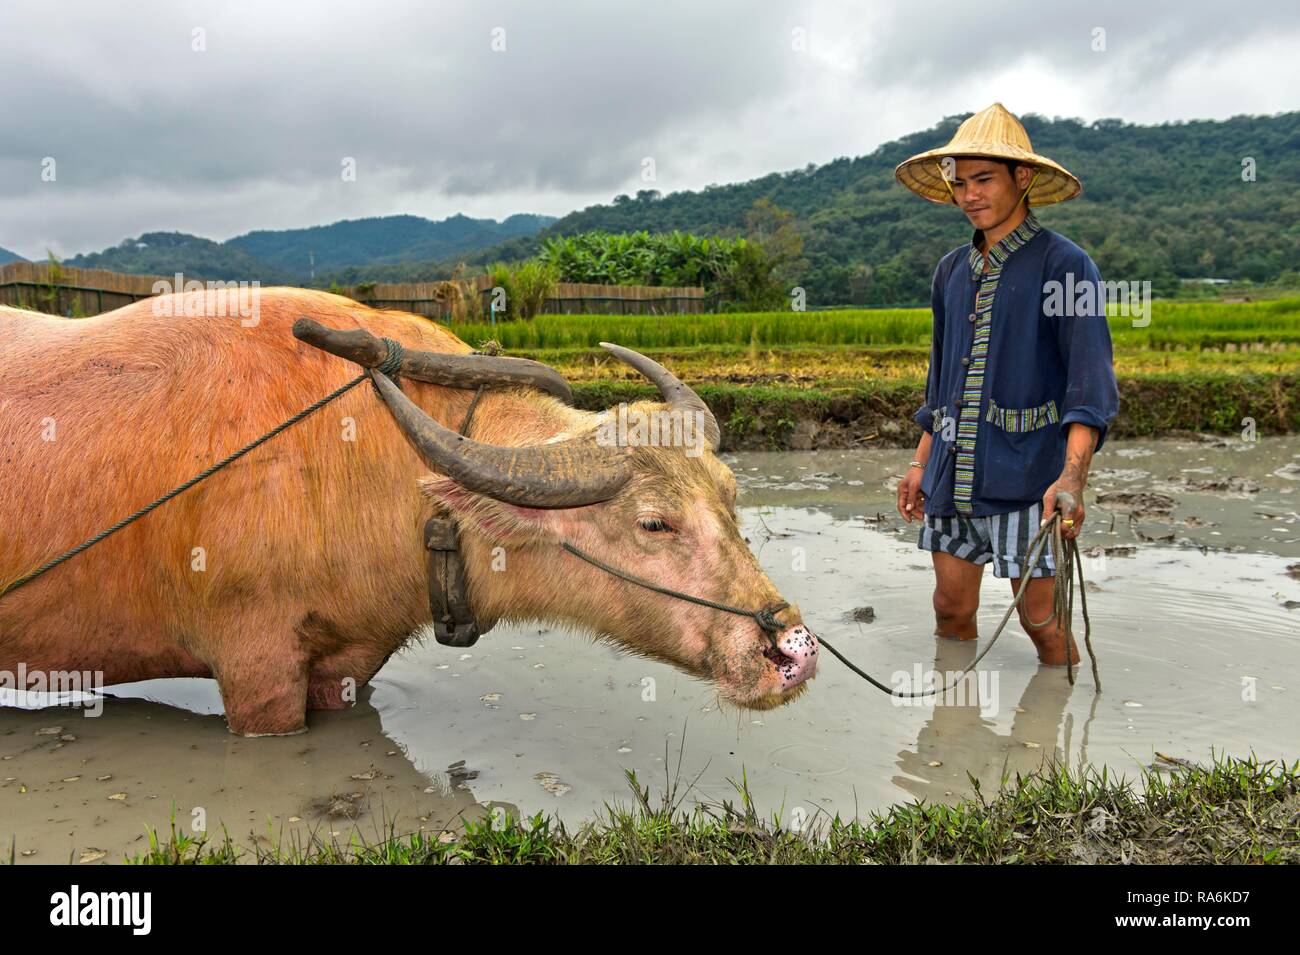 Rice farmer and water buffalo standing knee-deep in mud in a rice field, Luang Prabang, Laos Stock Photo